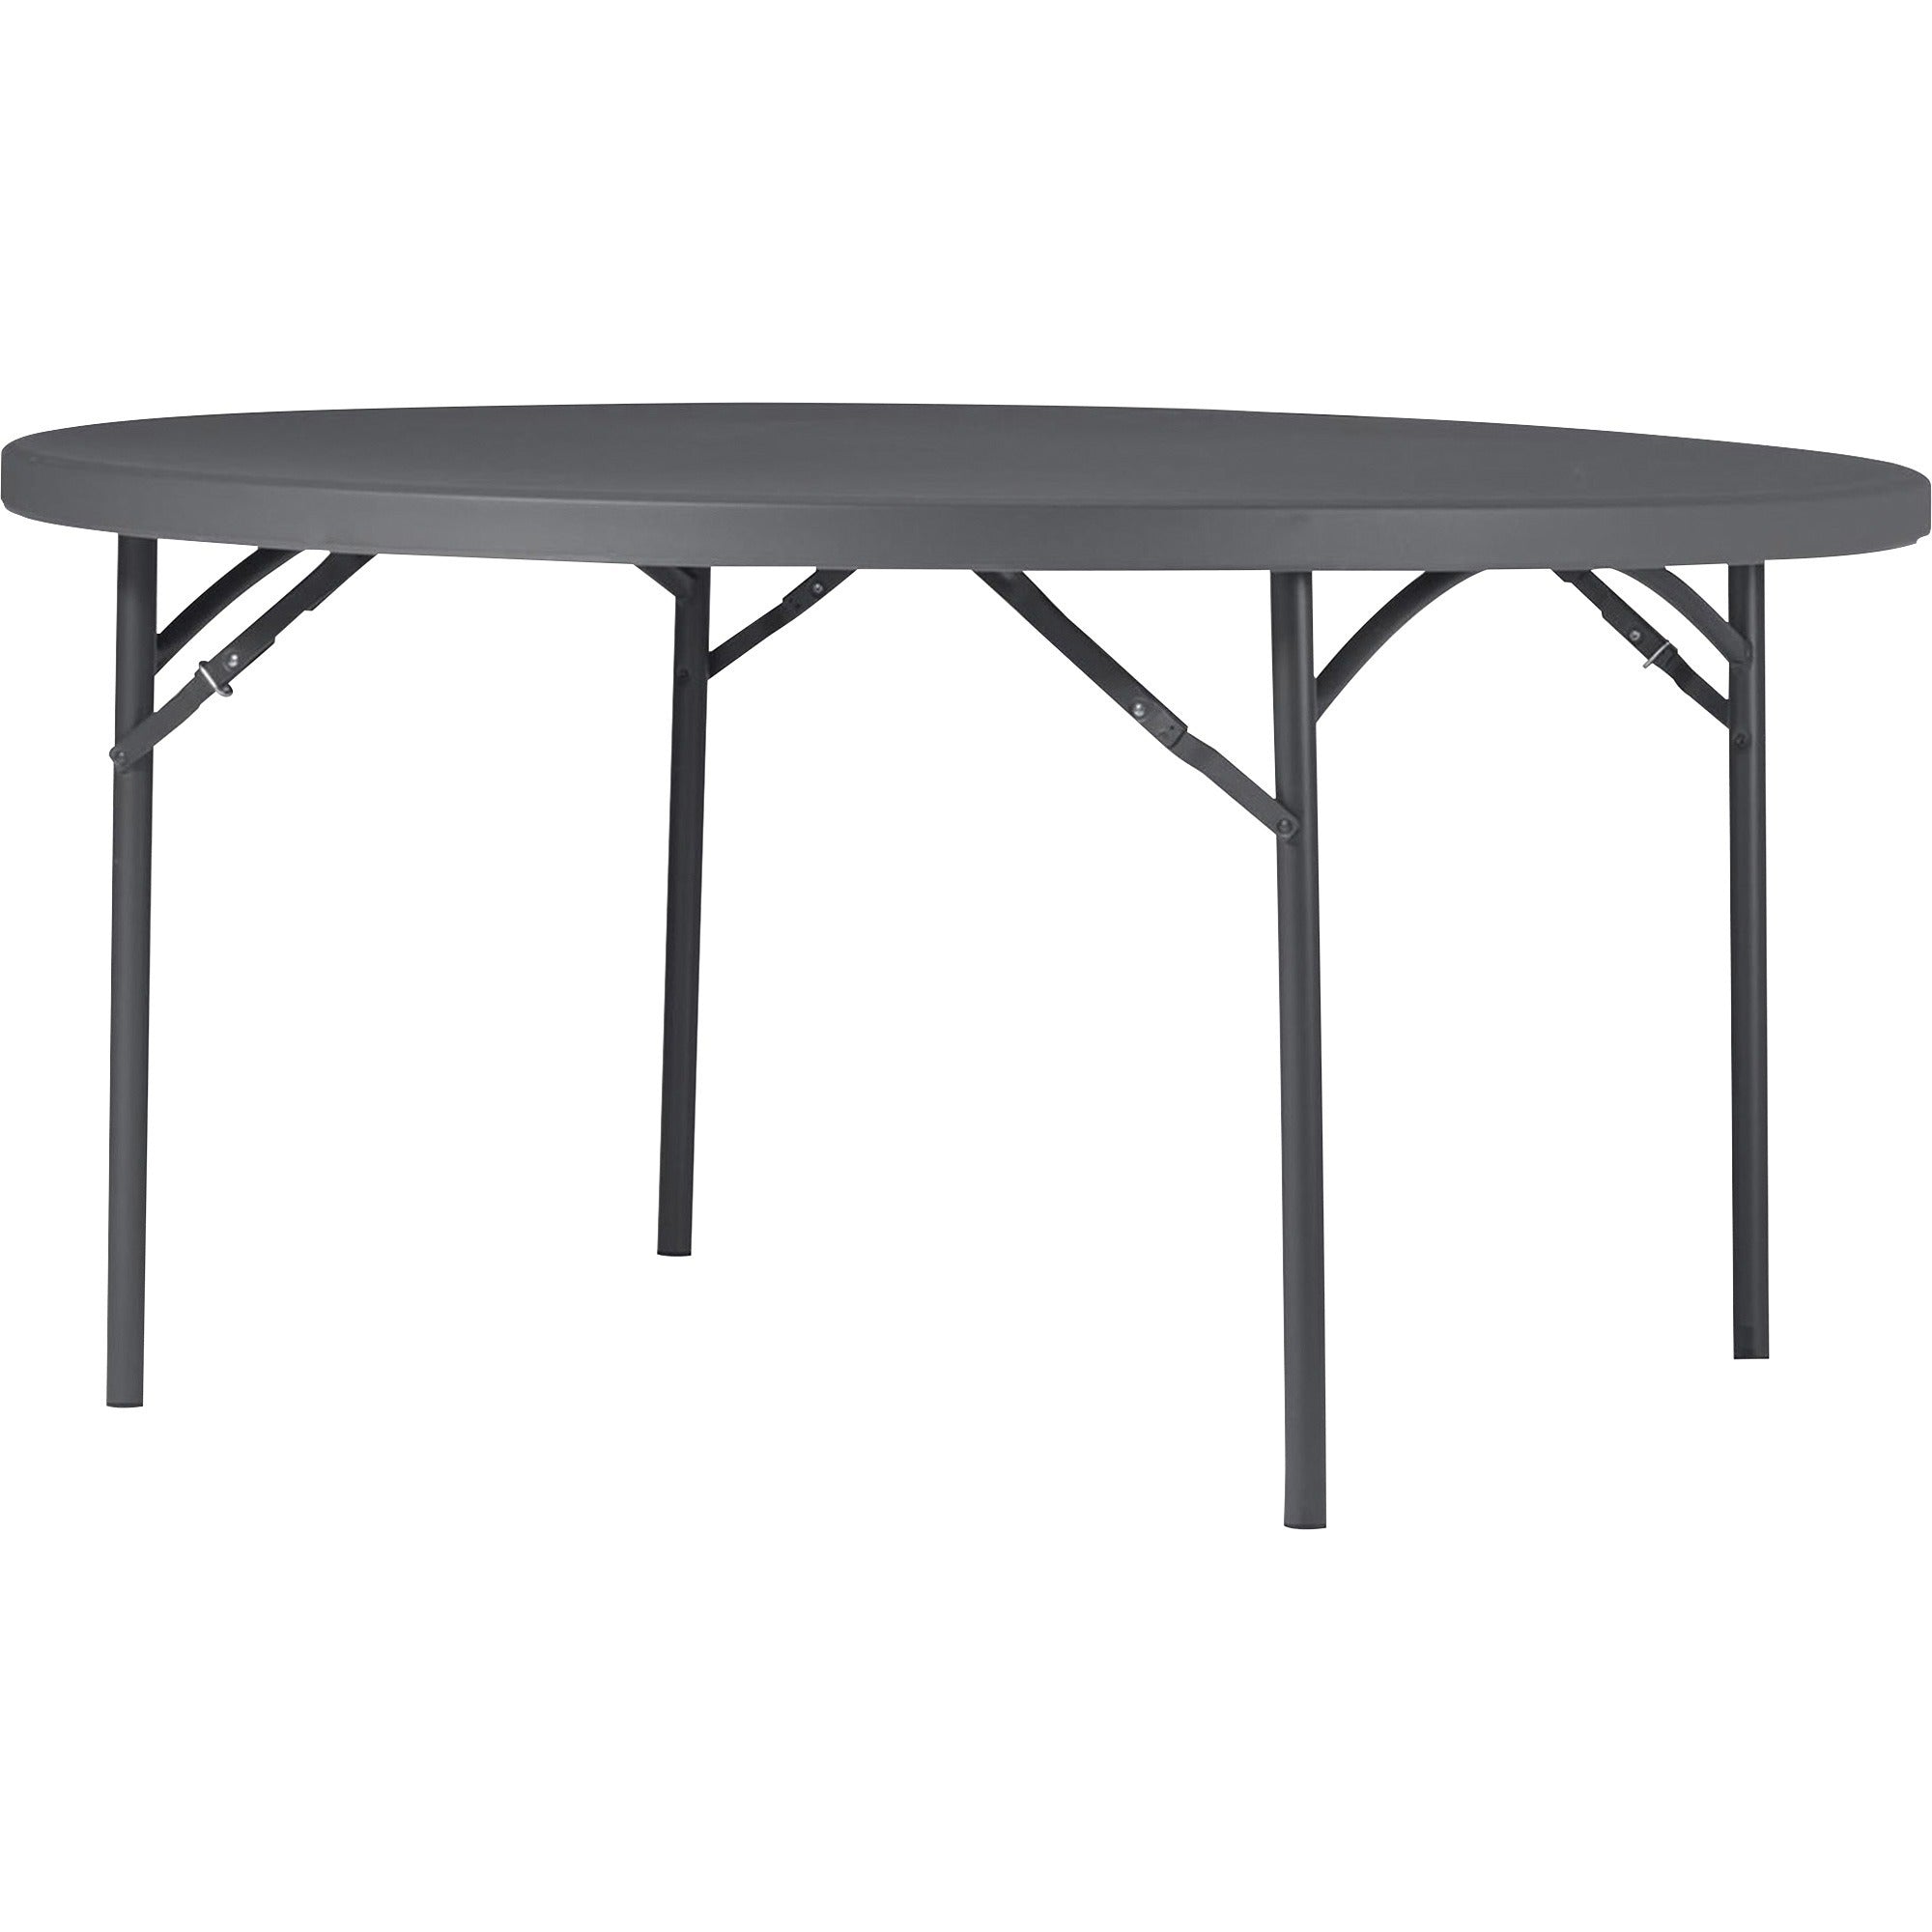 cosco-zown-commercial-round-blow-mold-fold-table-for-table-topround-top-750-lb-capacity-x-72-table-top-diameter-2930-height-gray-high-density-polyethylene-hdpe-resin-1-each_csc60537sgy1e - 1